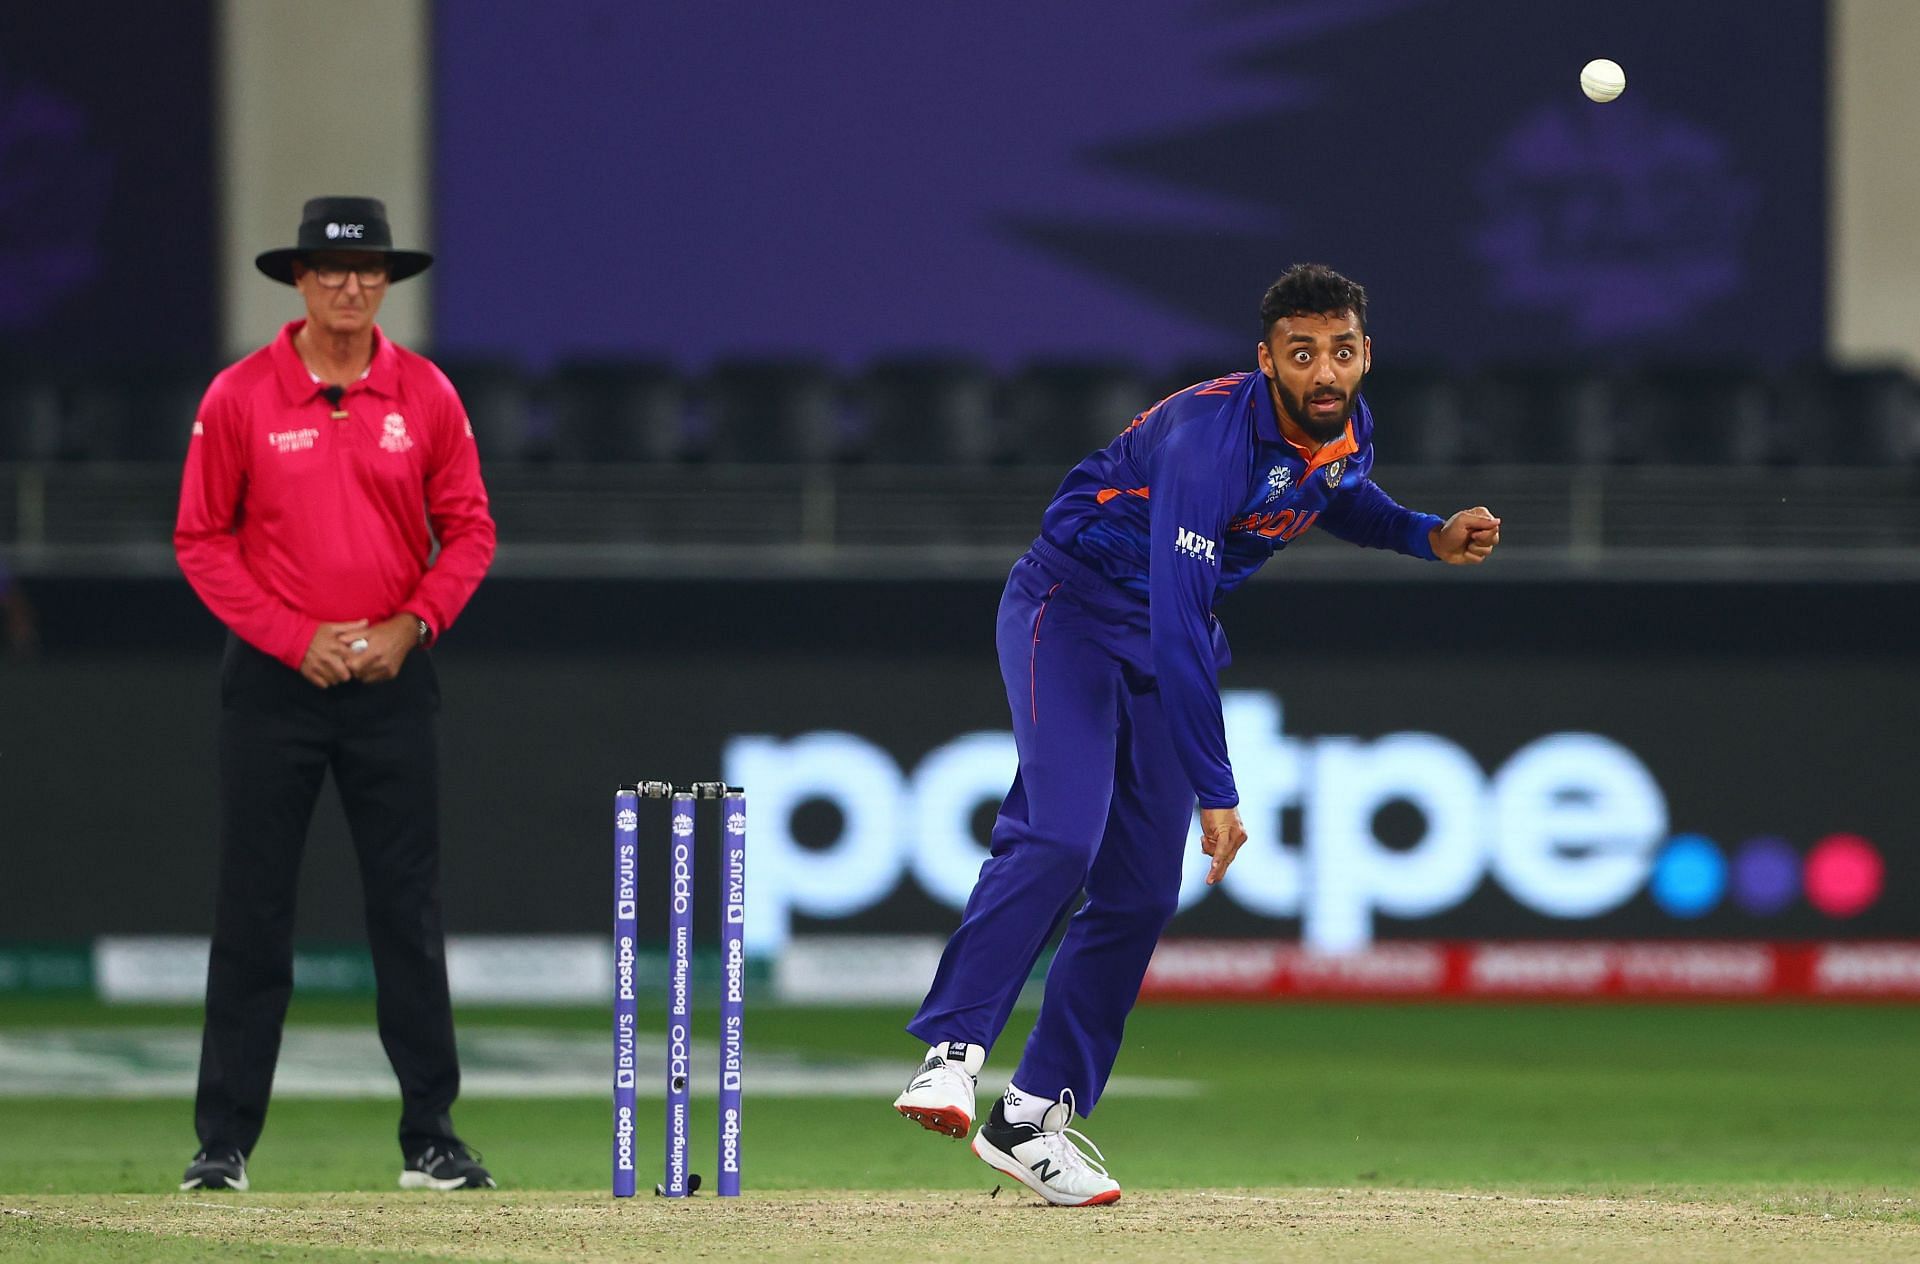 Can Varun Chakravarthy make himself a permanent fixture in the Indian team?